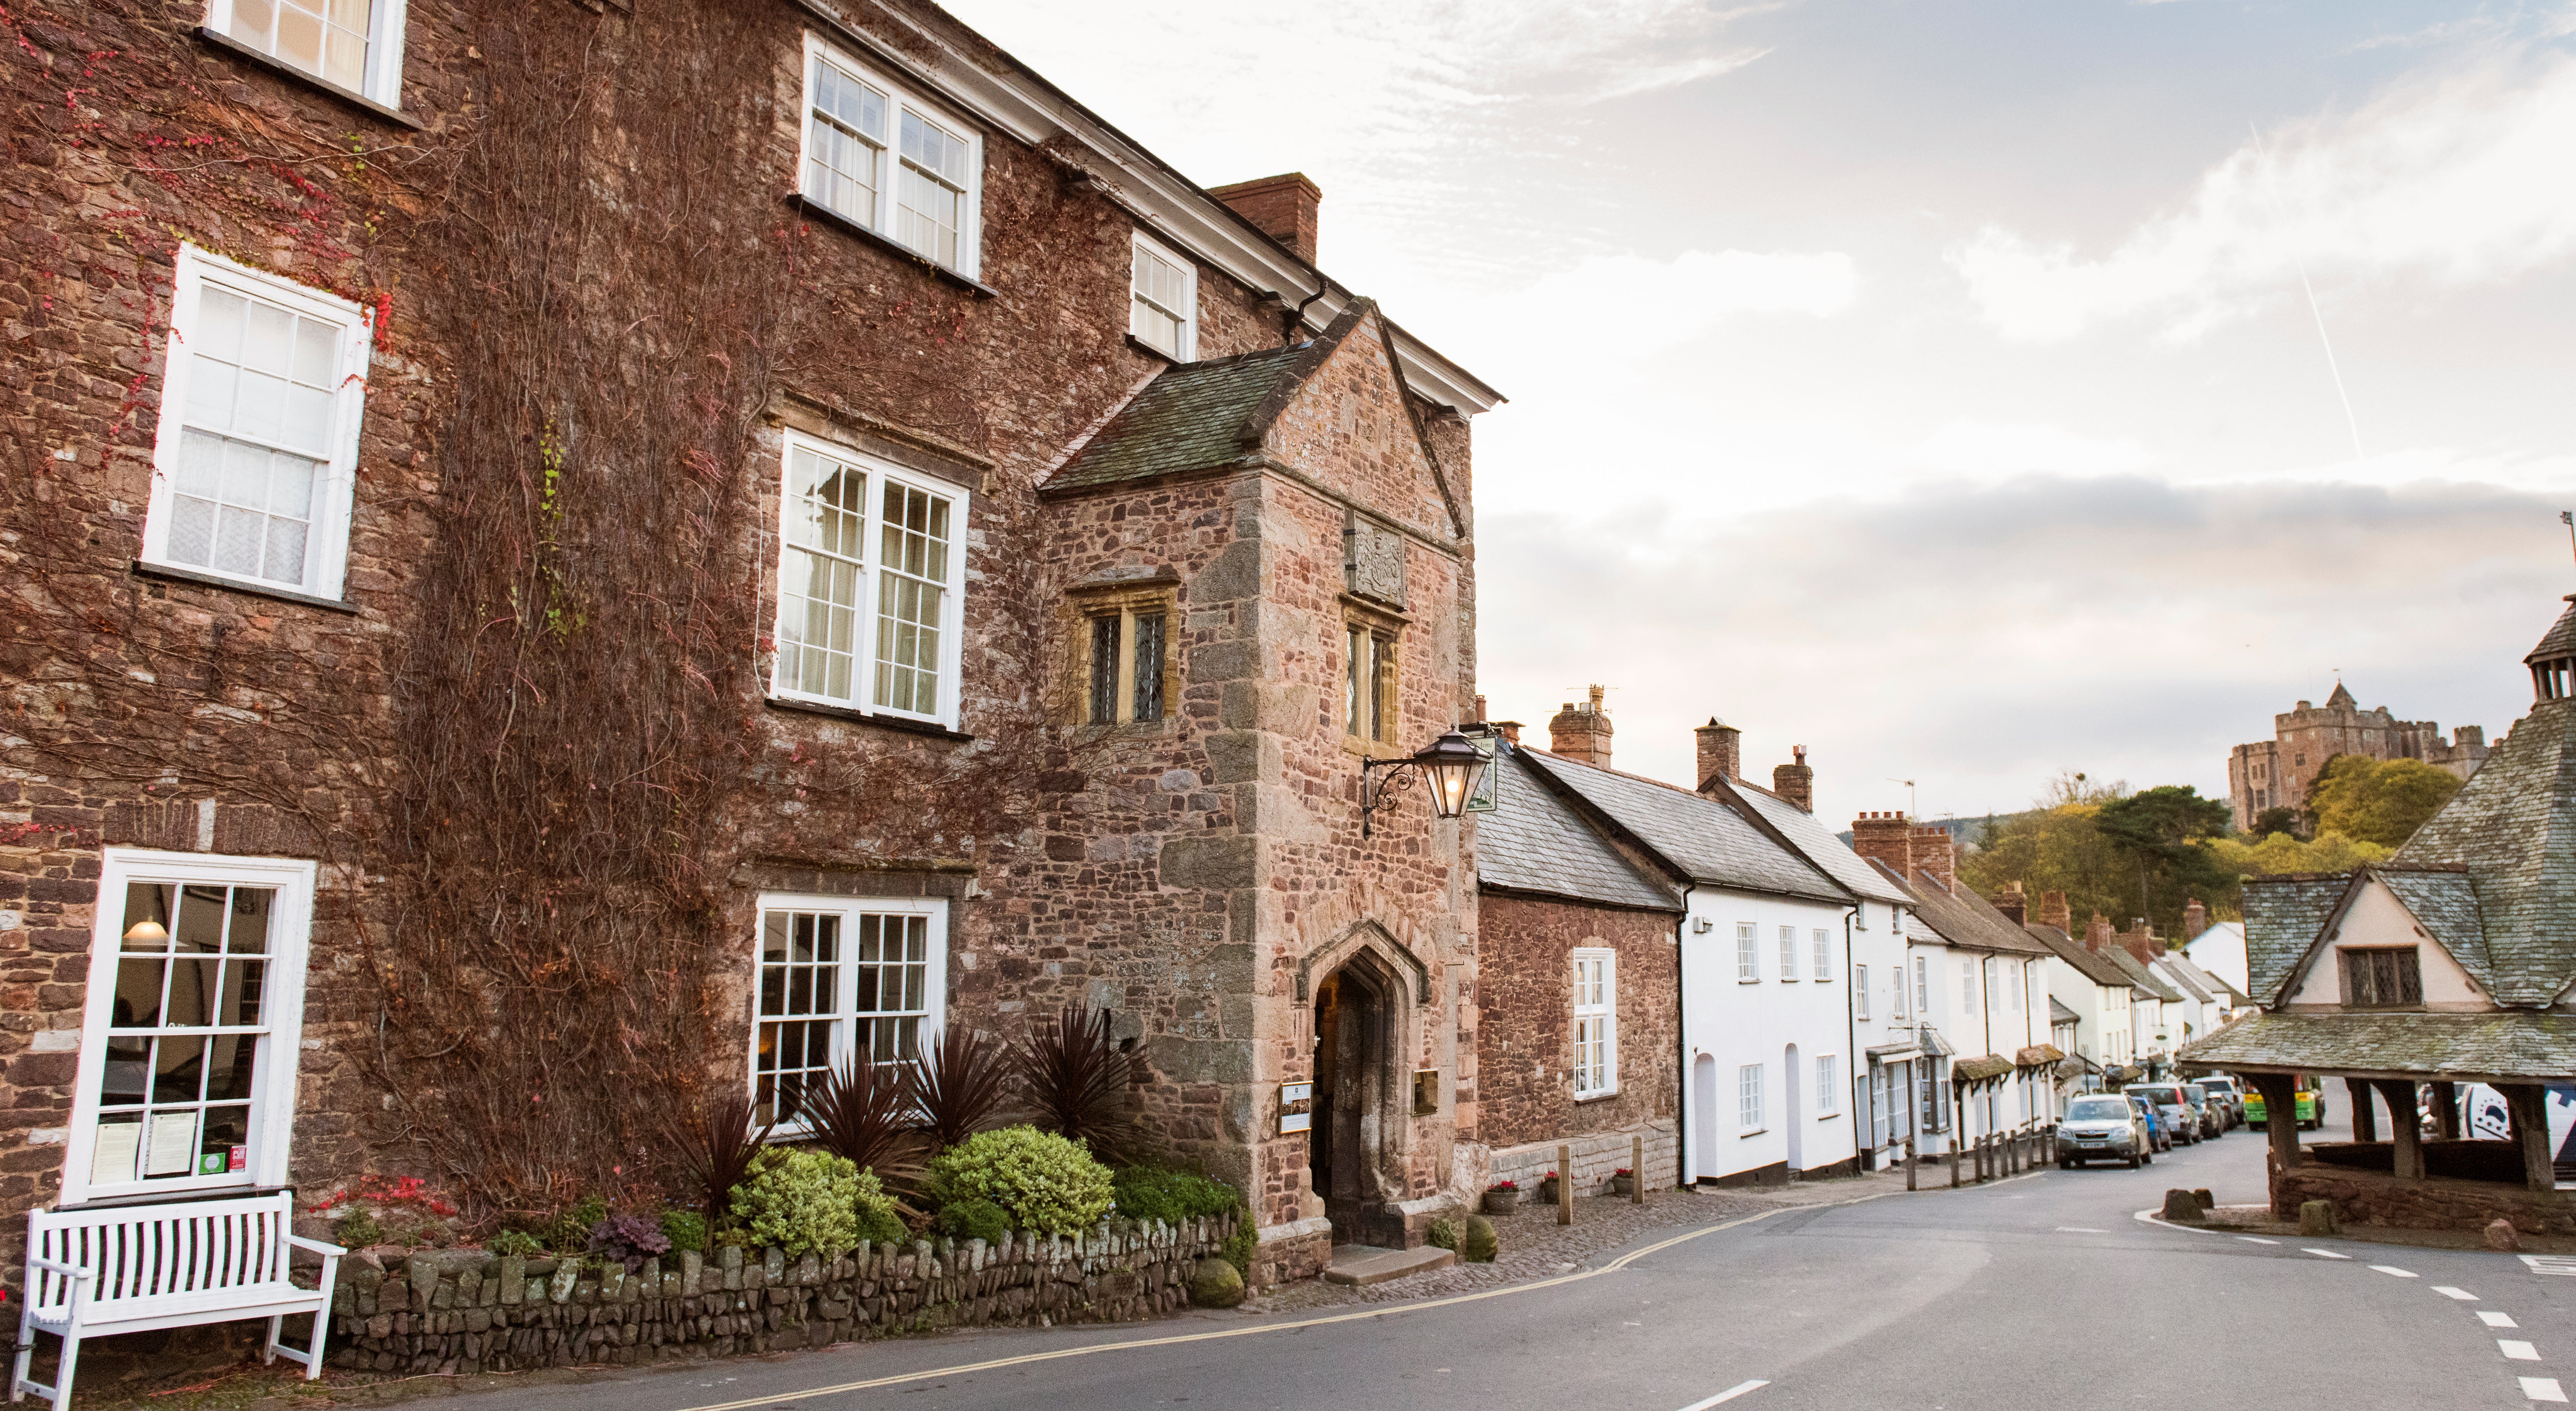 Stay just a stones’ throw from the lovely Dunster Castle